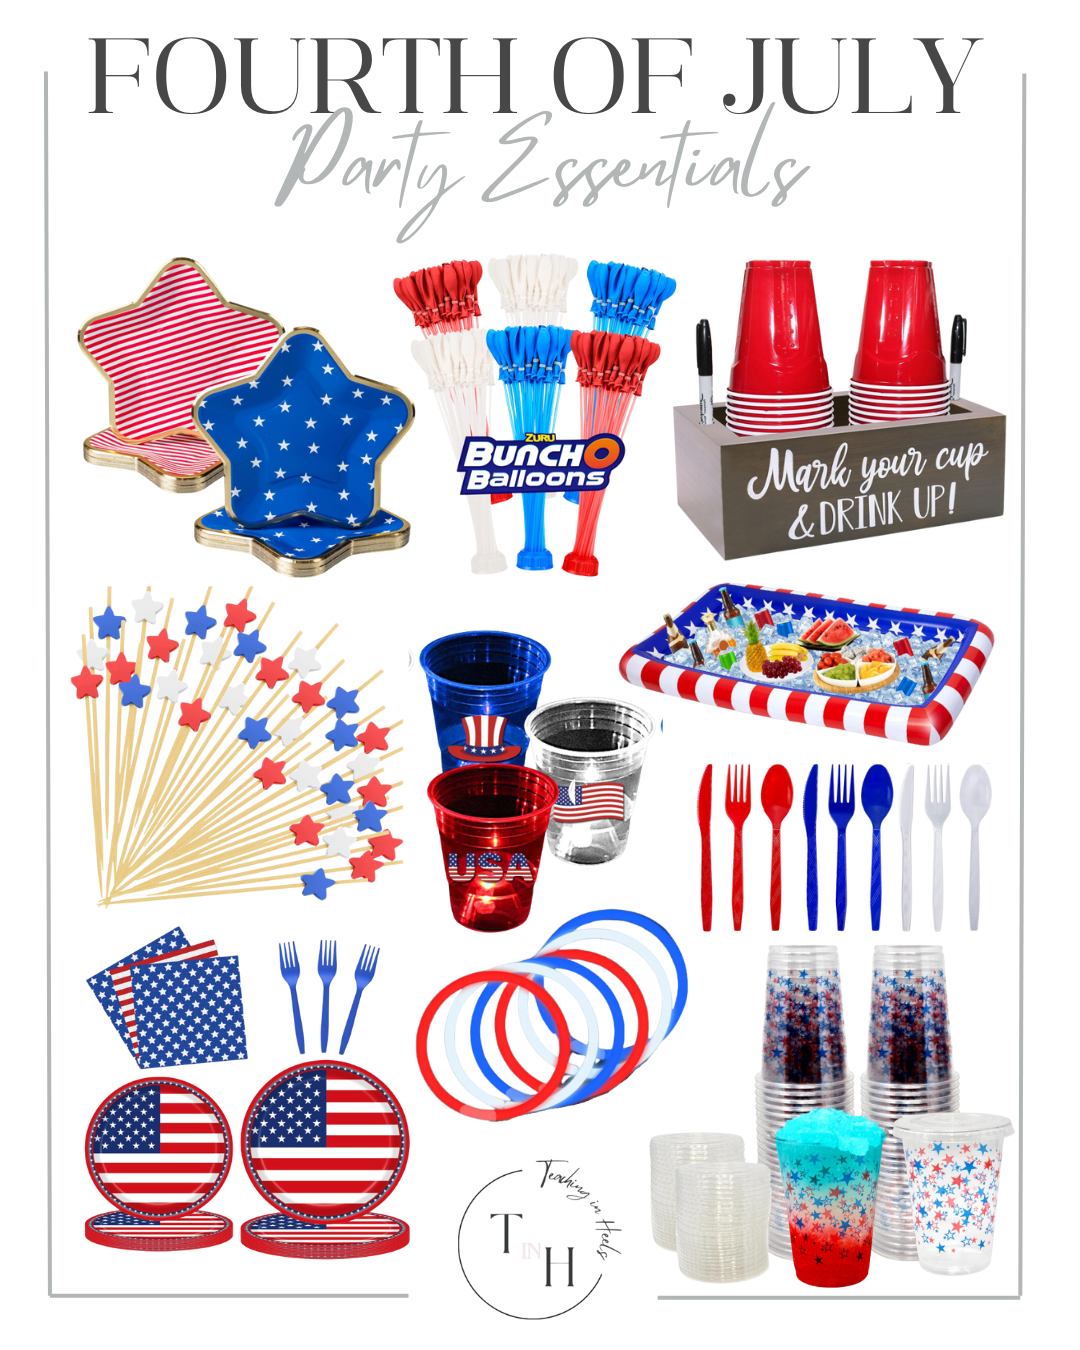 4th of July Style Guide: Must-Have Outfits & Essentials

fourth of july, summer, summer outfit, summer fashion, outdoor hosting, party essentials, seasonal, patriotic party essentials, americana inspired 